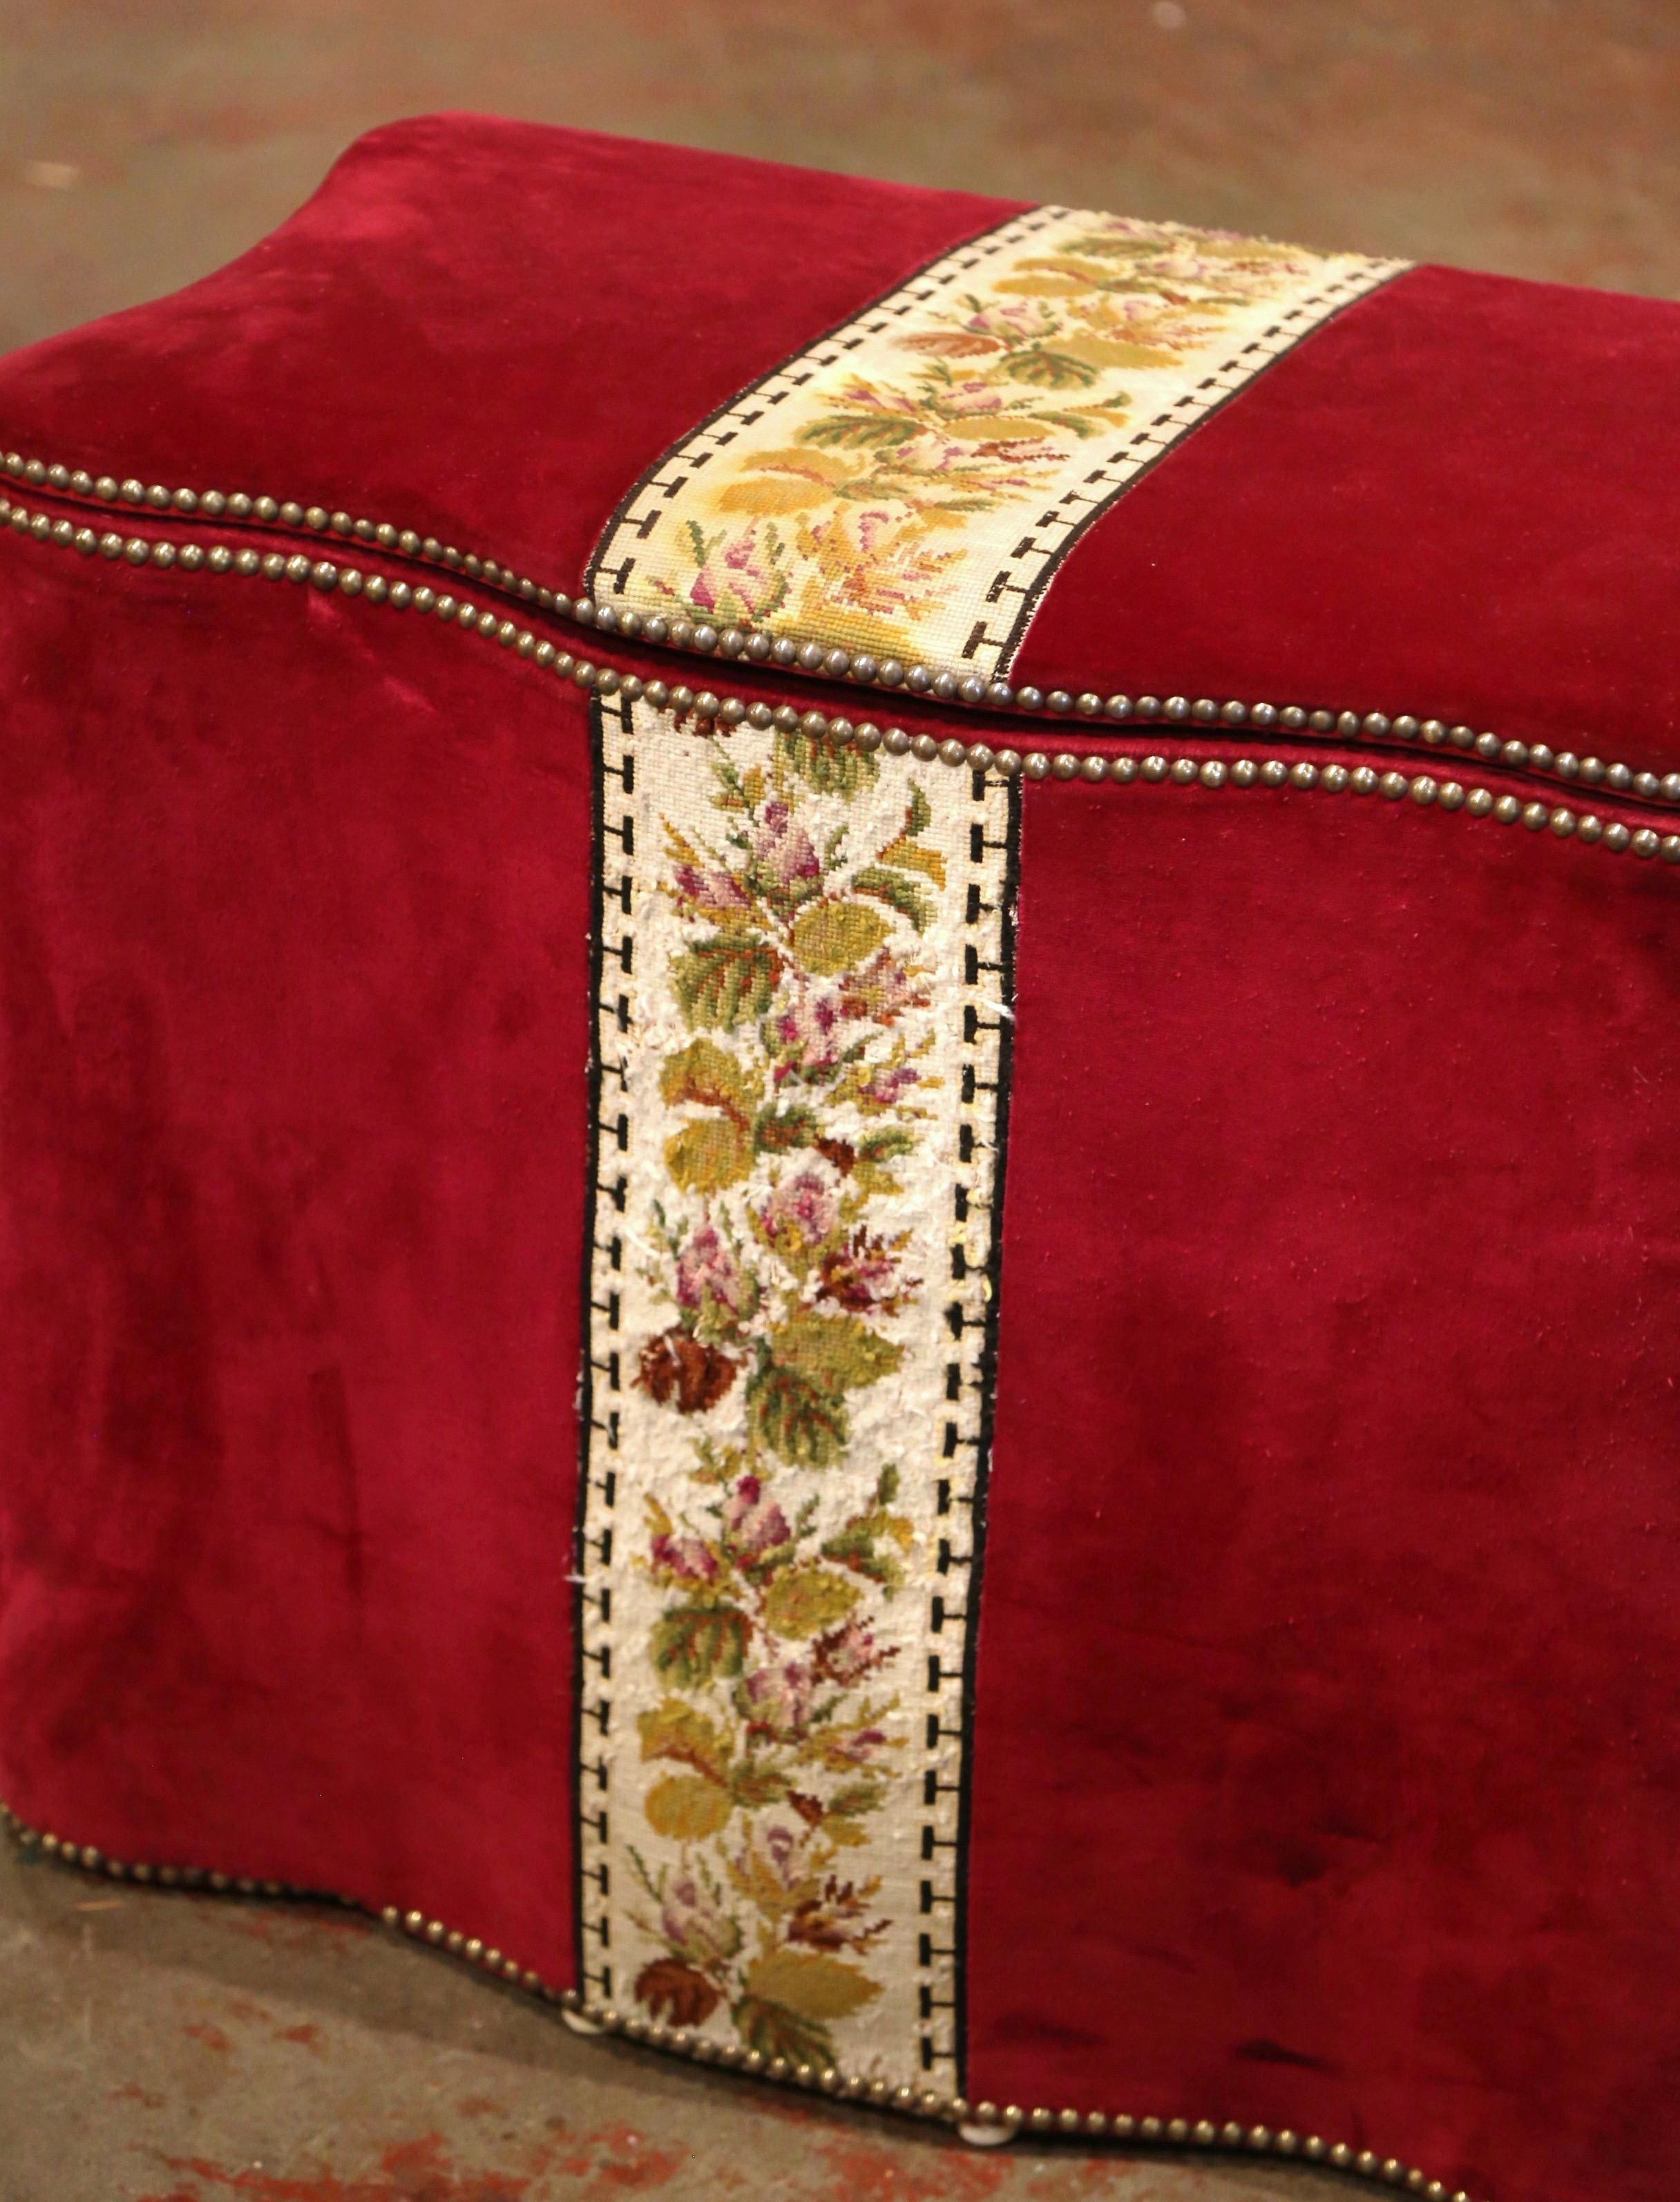 Use this antique trunk for your fireplace wood or dirty laundry; crafted in France circa 1920, the hamper with top features handwoven floral needlepoint strip over a luxurious red velvet upholstery embellished with nailheads. The storage basket is